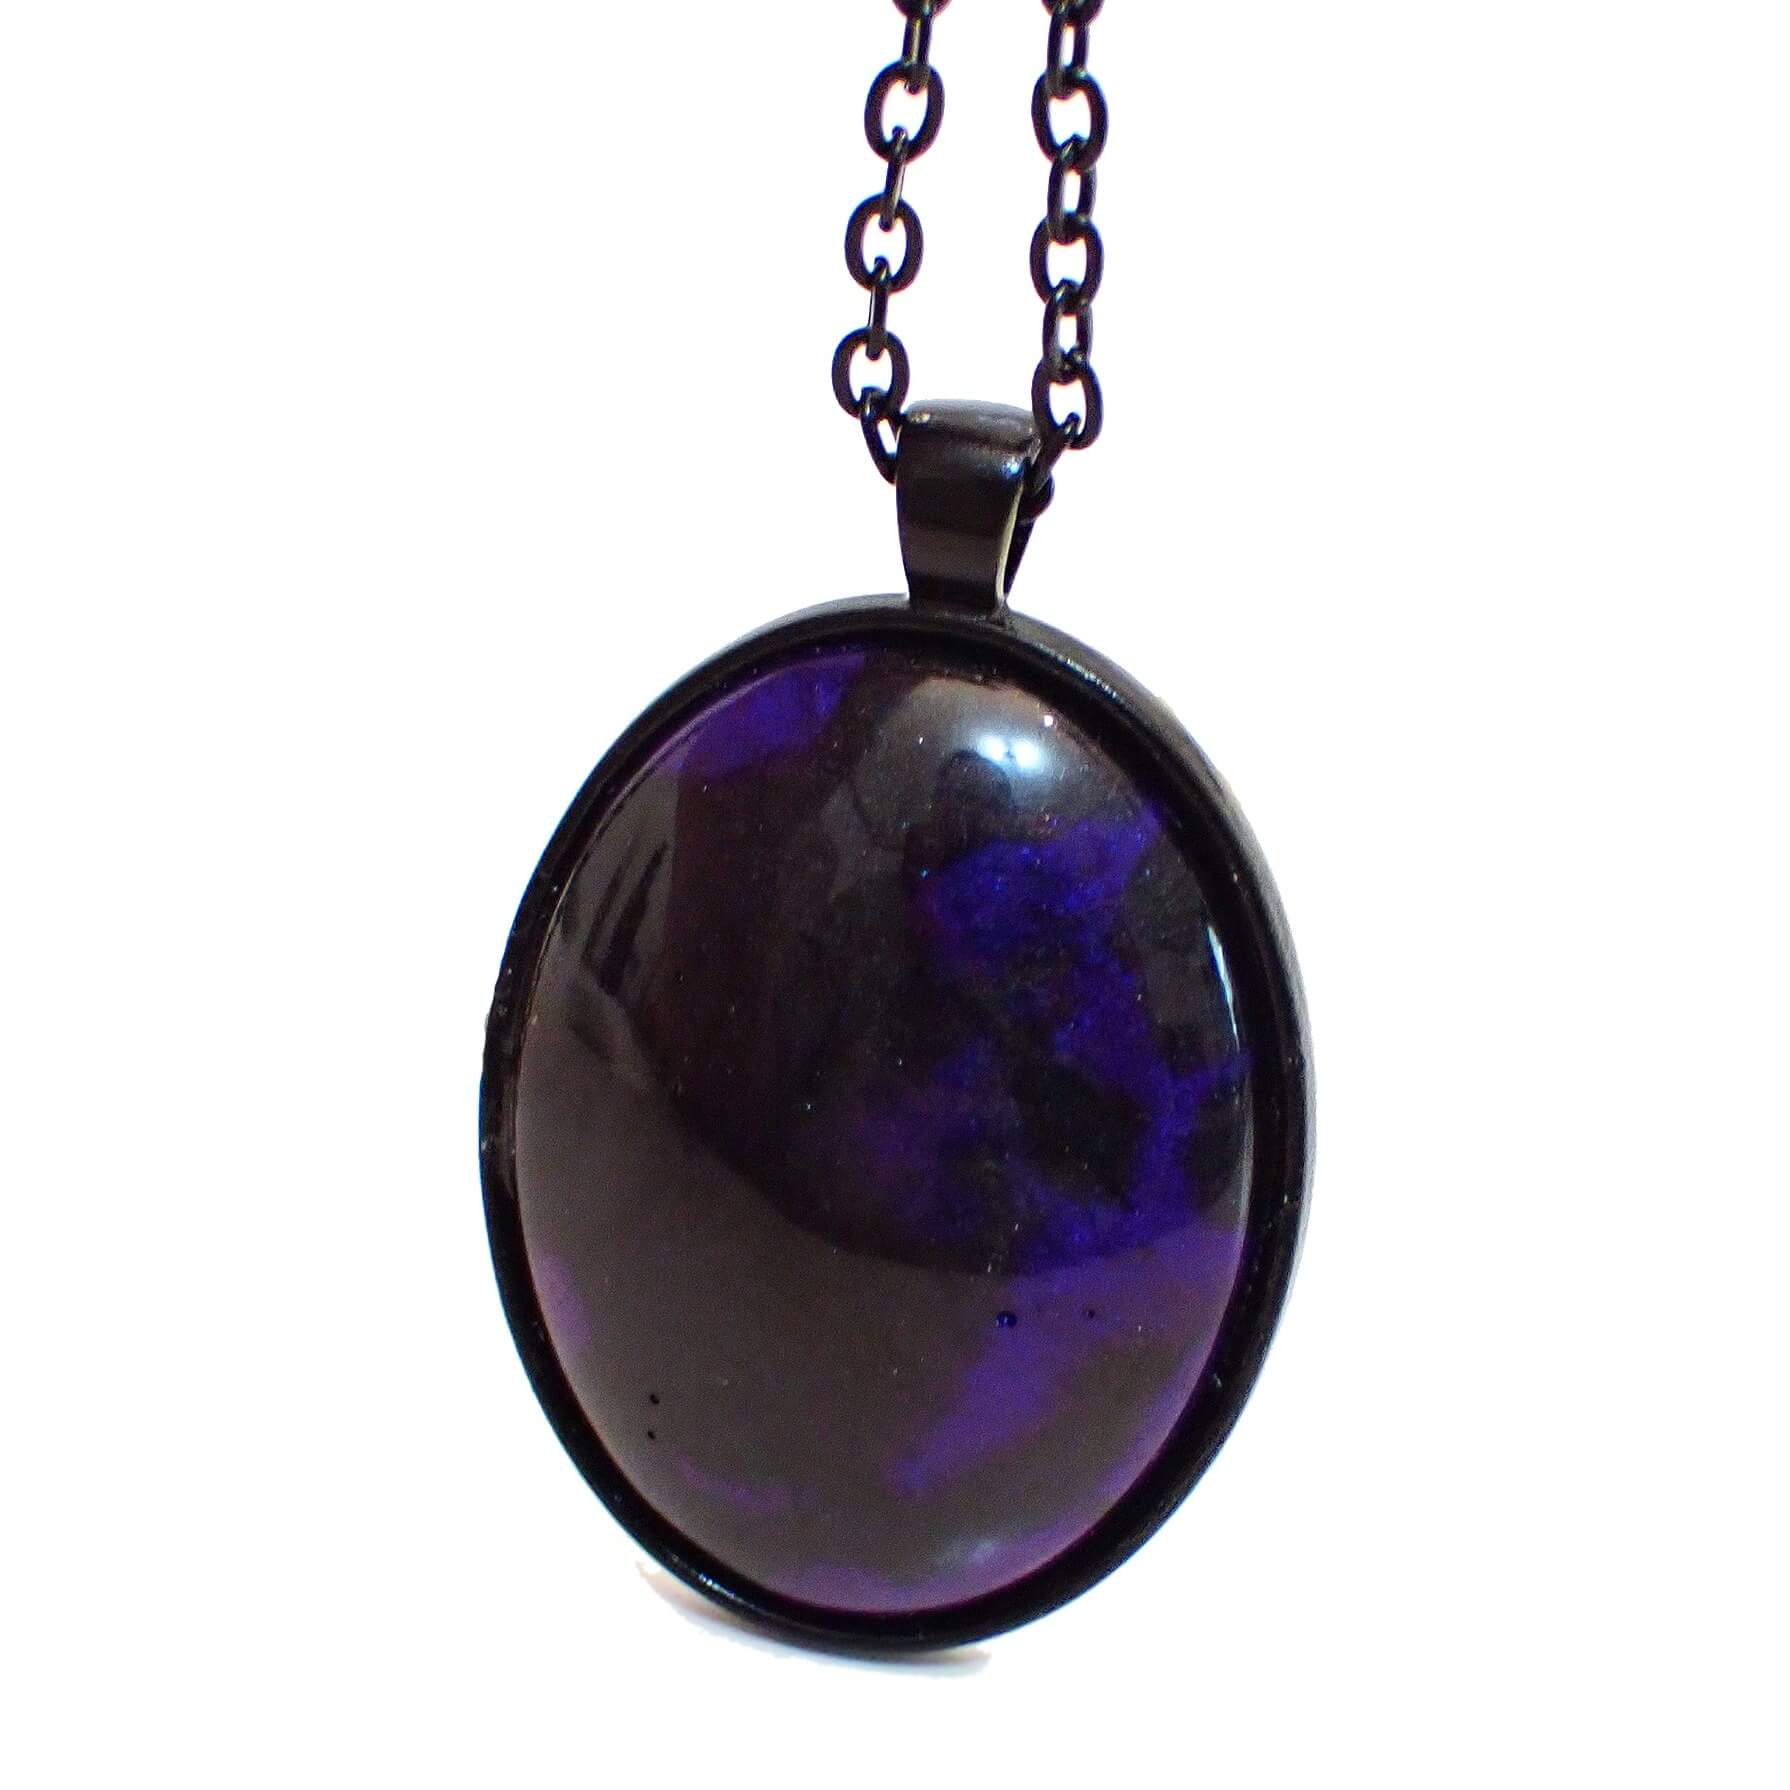 Enlarged front view of the handmade Goth resin pendant. The metal is black coated. There is a large domed oval pendant with pearly black and purple marbled resin. Some of the purple resin has hints of blue depending on how the light is hitting it.